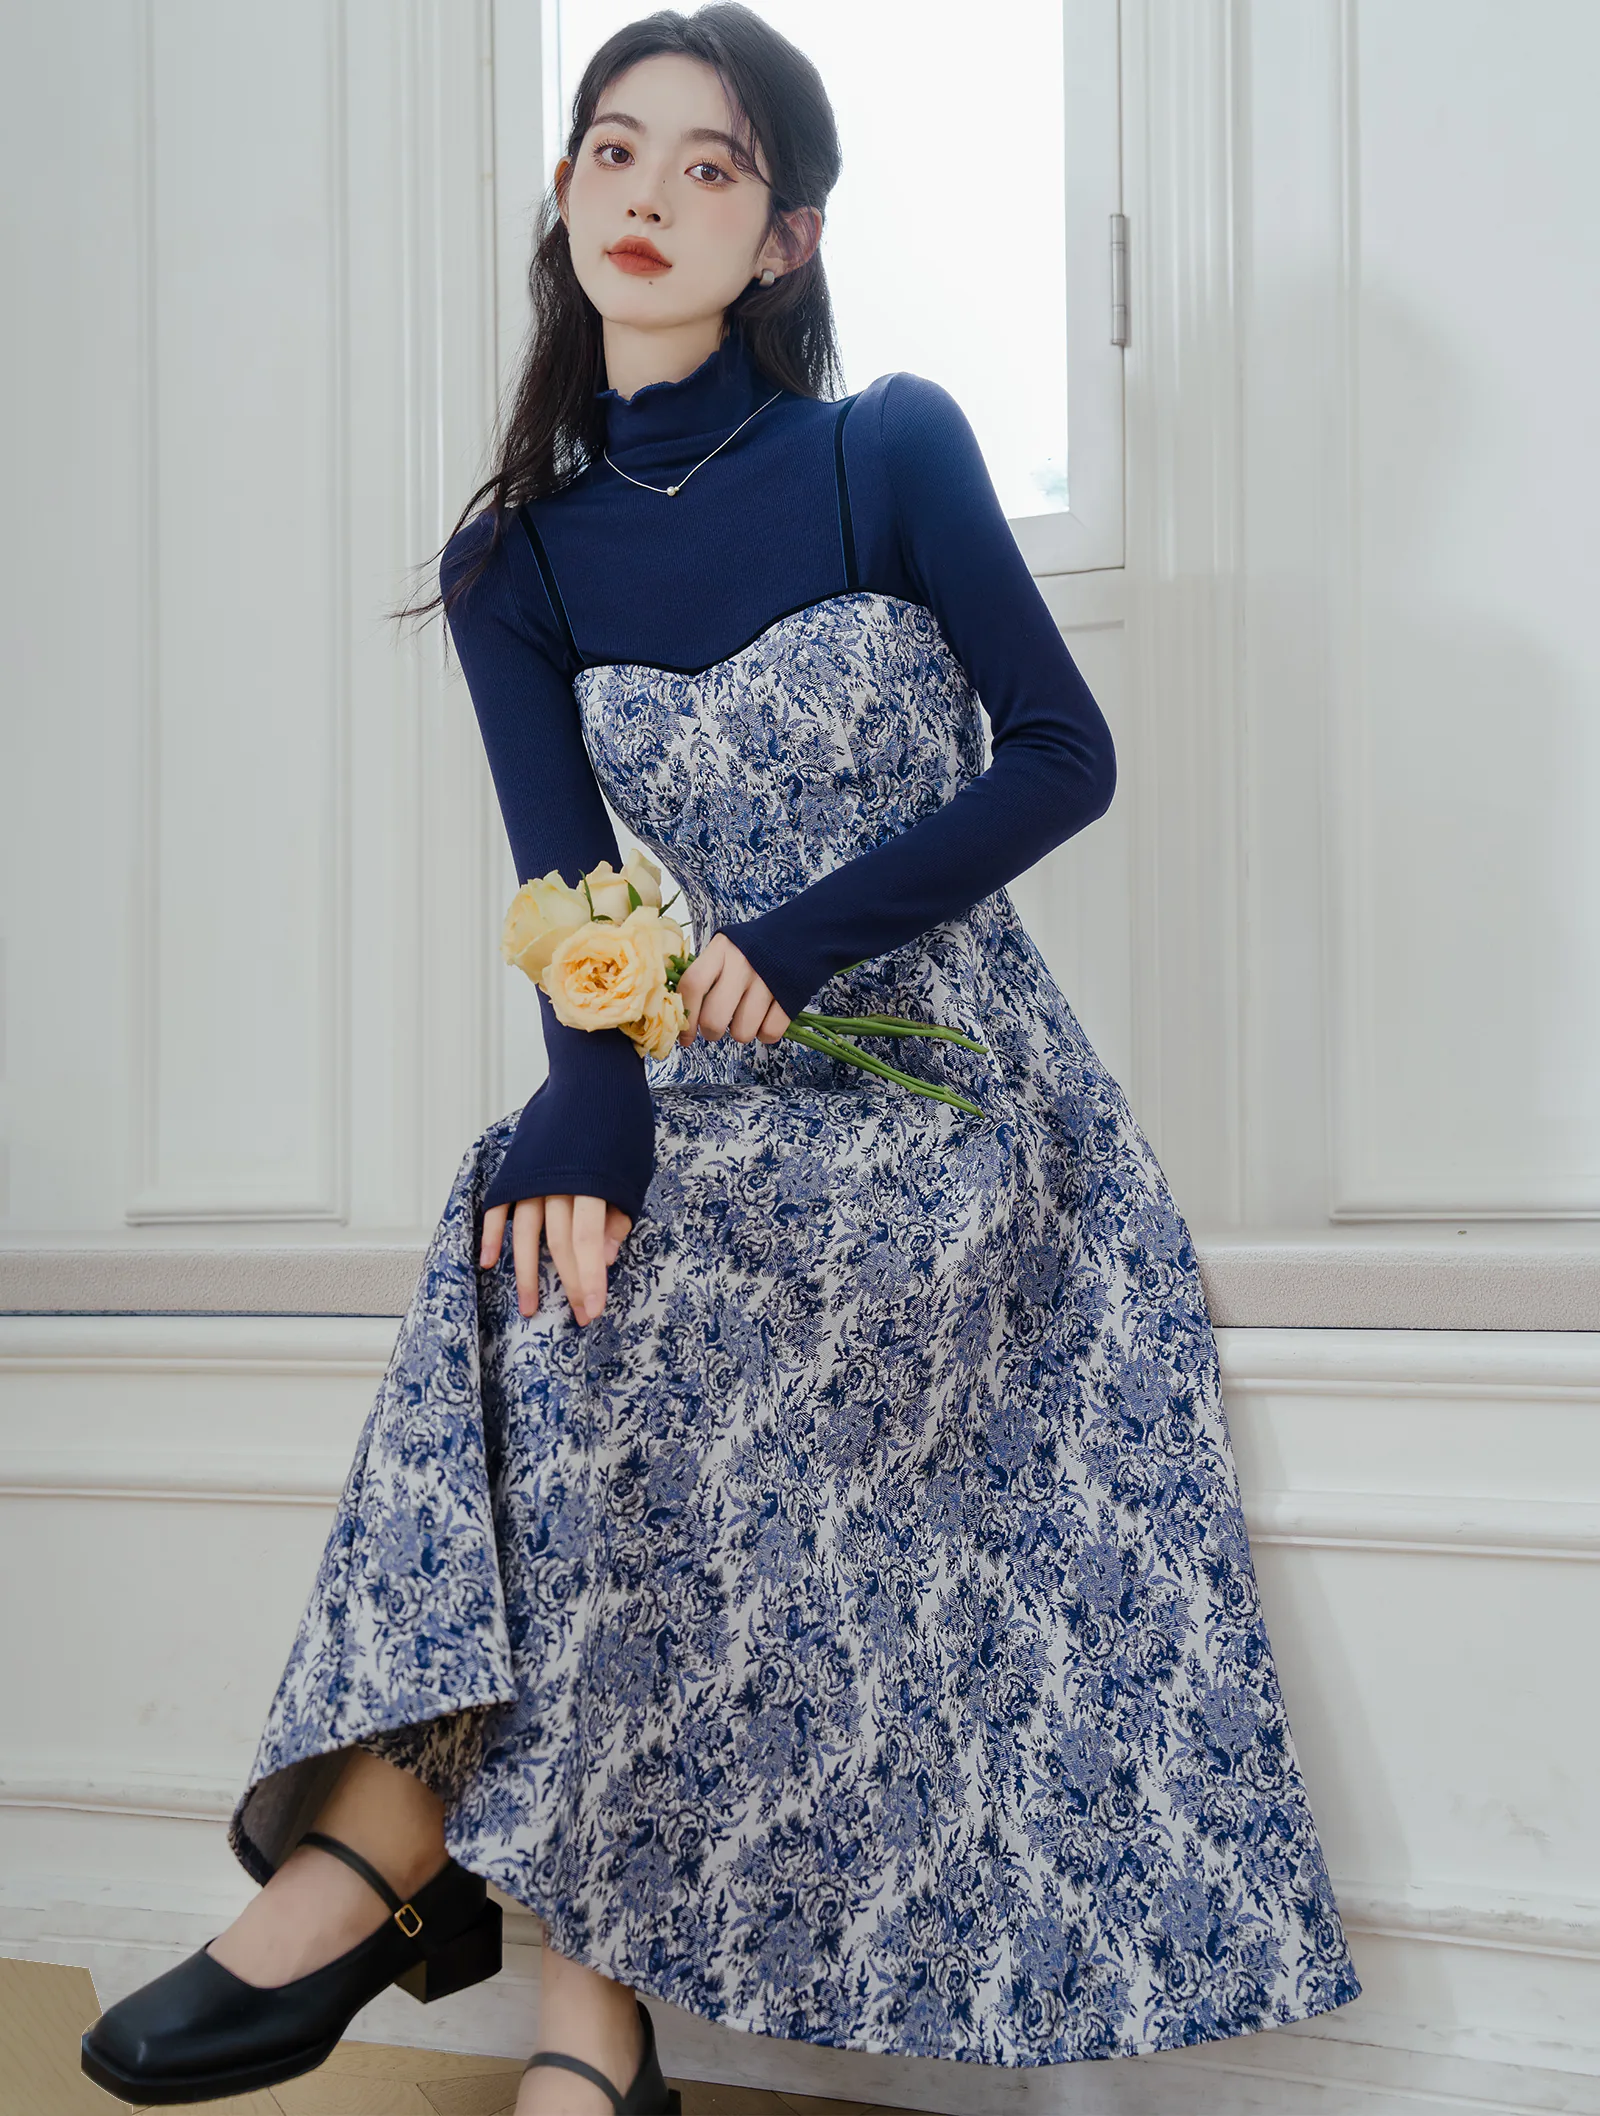 Sweet Blue Turtleneck Knit Sweater with Thick Floral Slip Dress Suit05